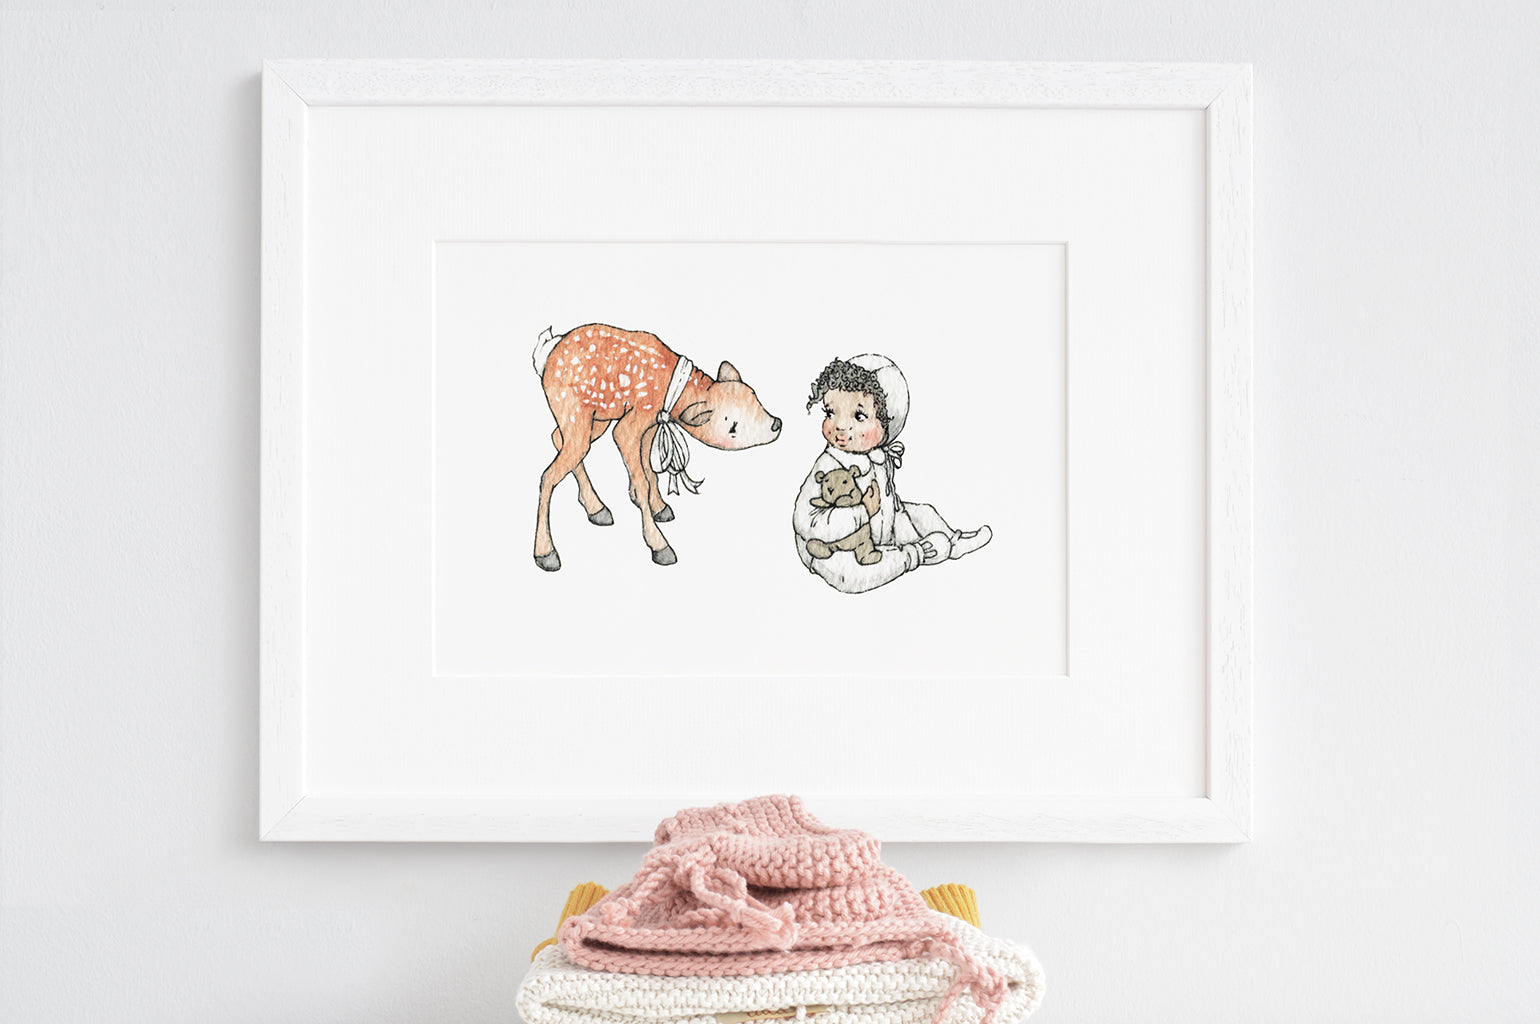 Children's illustration 'Baby Meets Fawn' Print